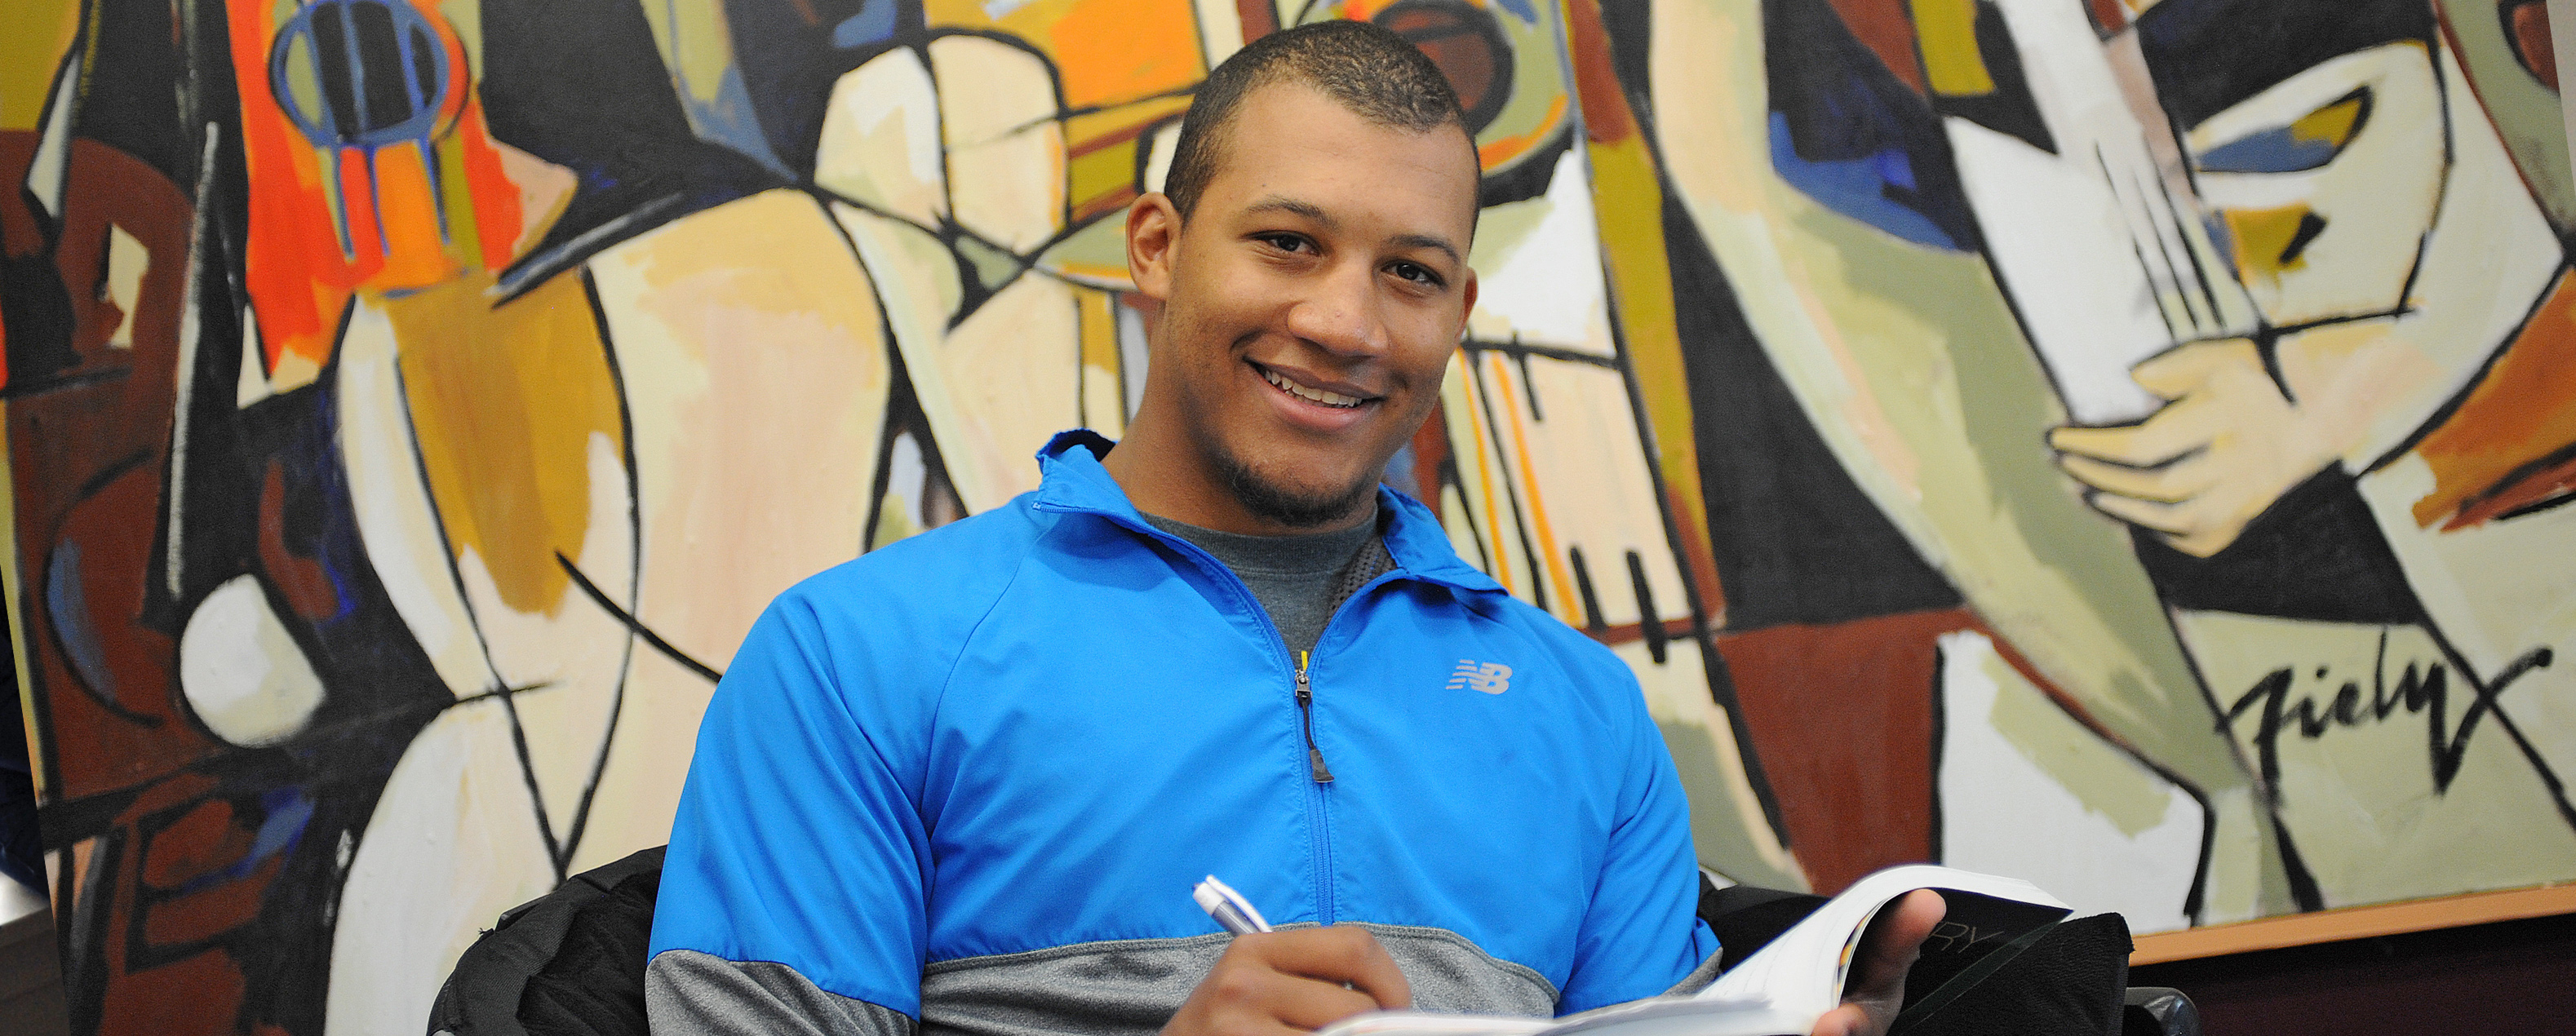 Student sitting in front of a large painting and writing in a book. He smiles at the camera.